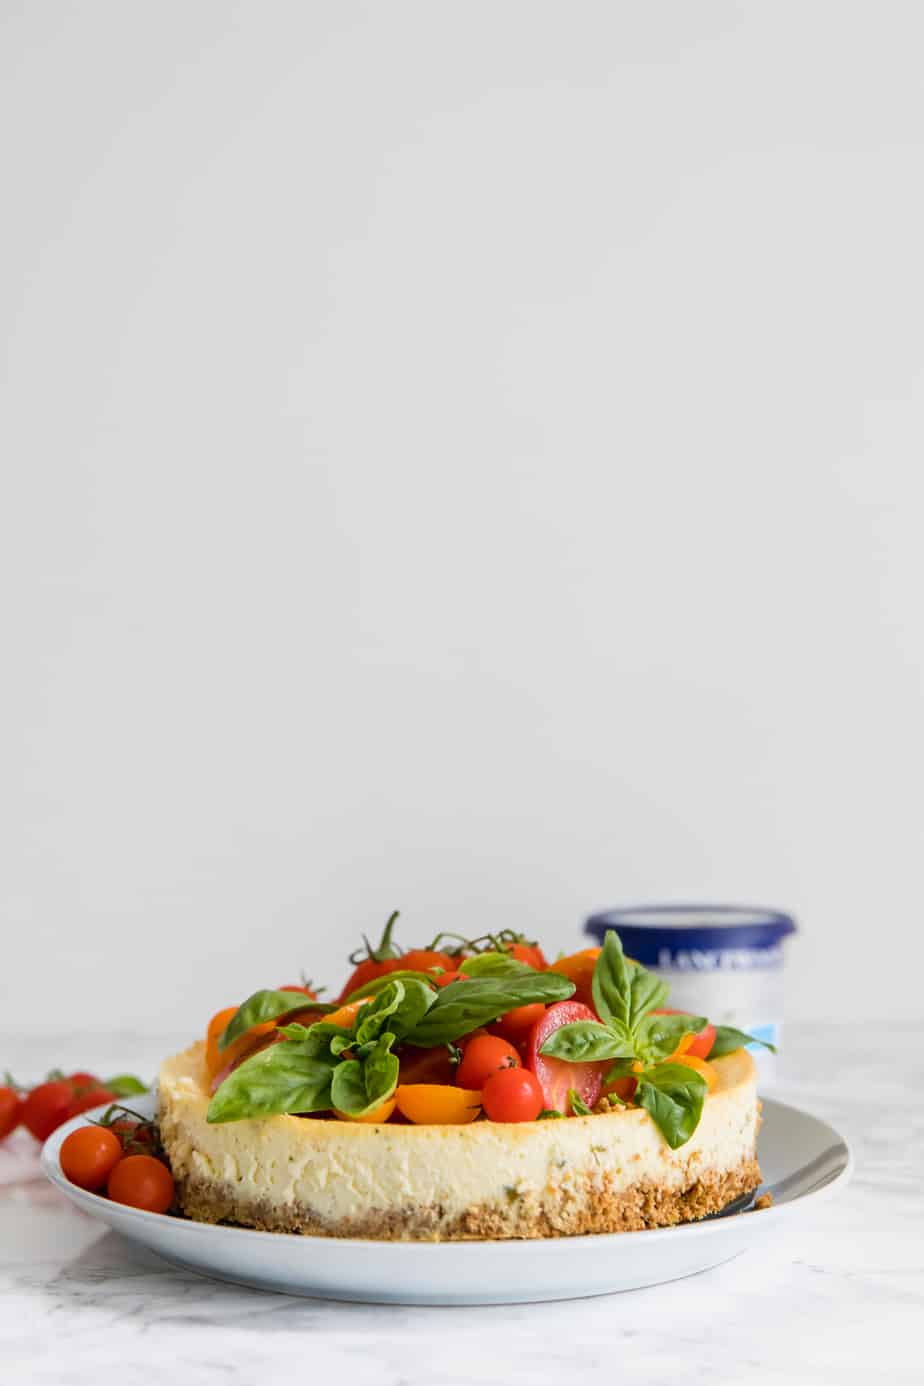 This Tomato & Basil Savoury Cheesecake is the perfect creamy lunch recipe, quick and easy to make and oh so delicious! Plus, WIN a trip to New York with Lancewood.